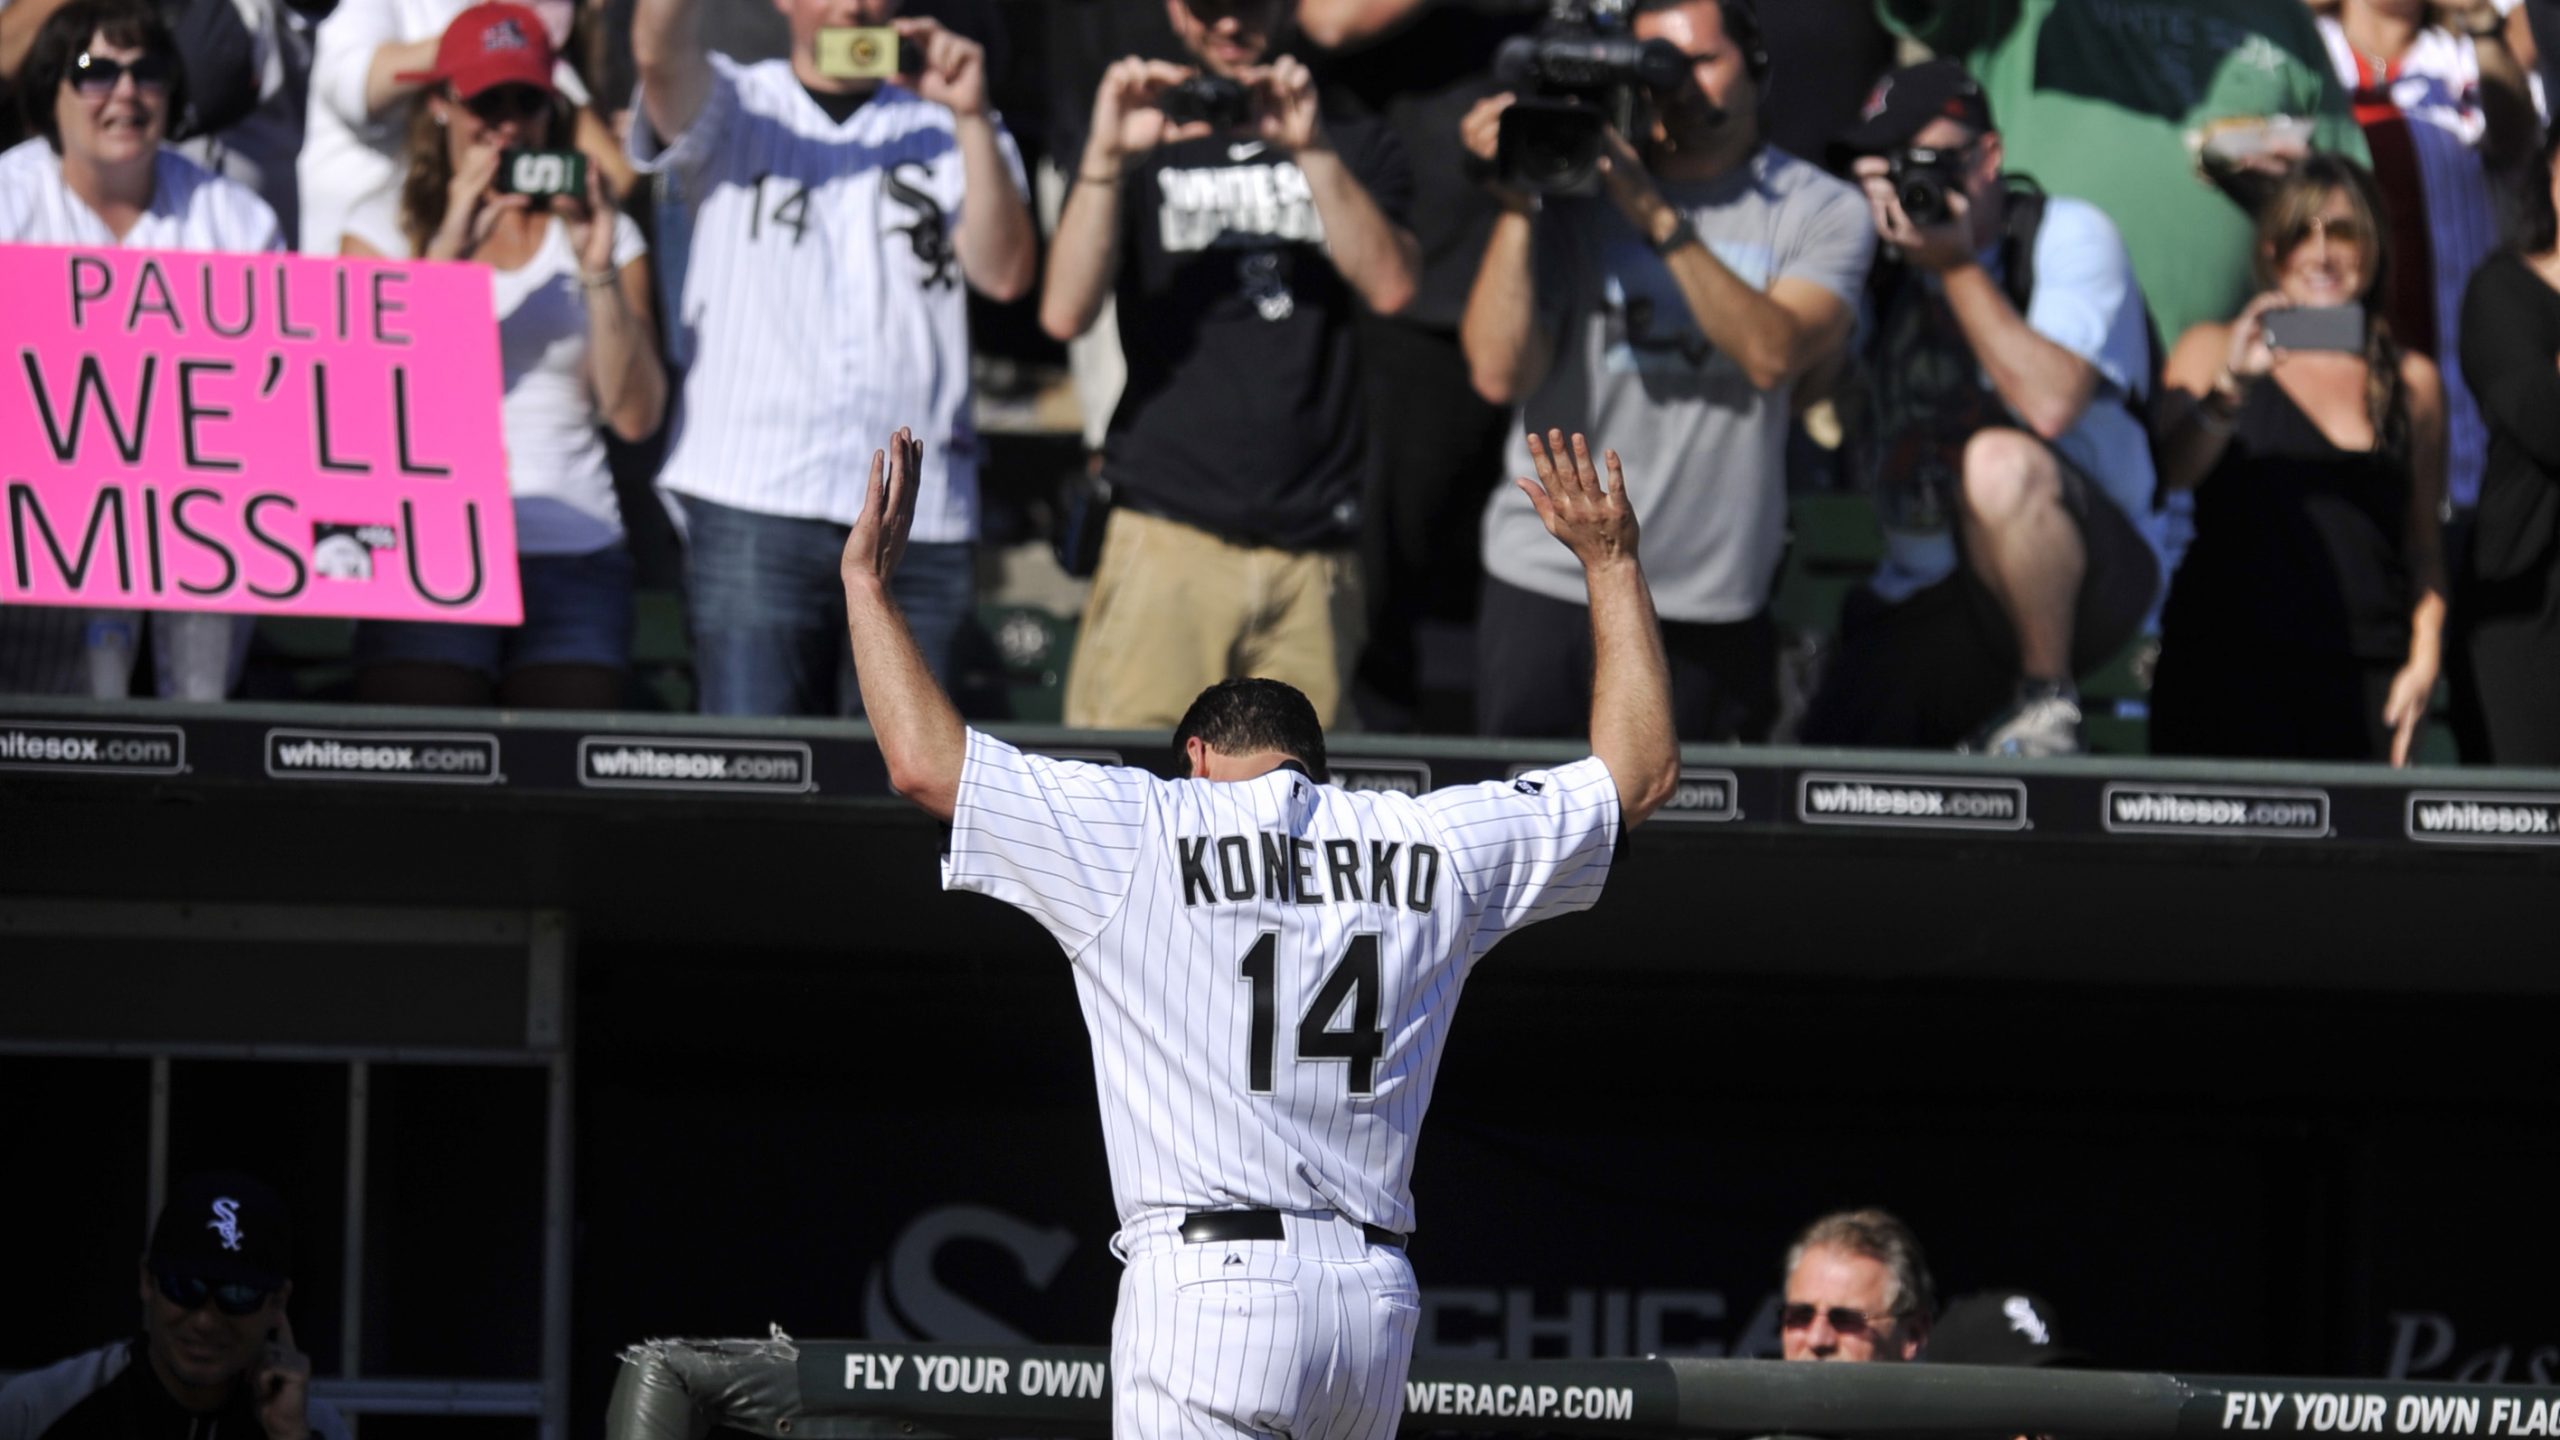 White Sox fall to Royals in Konerko's last game